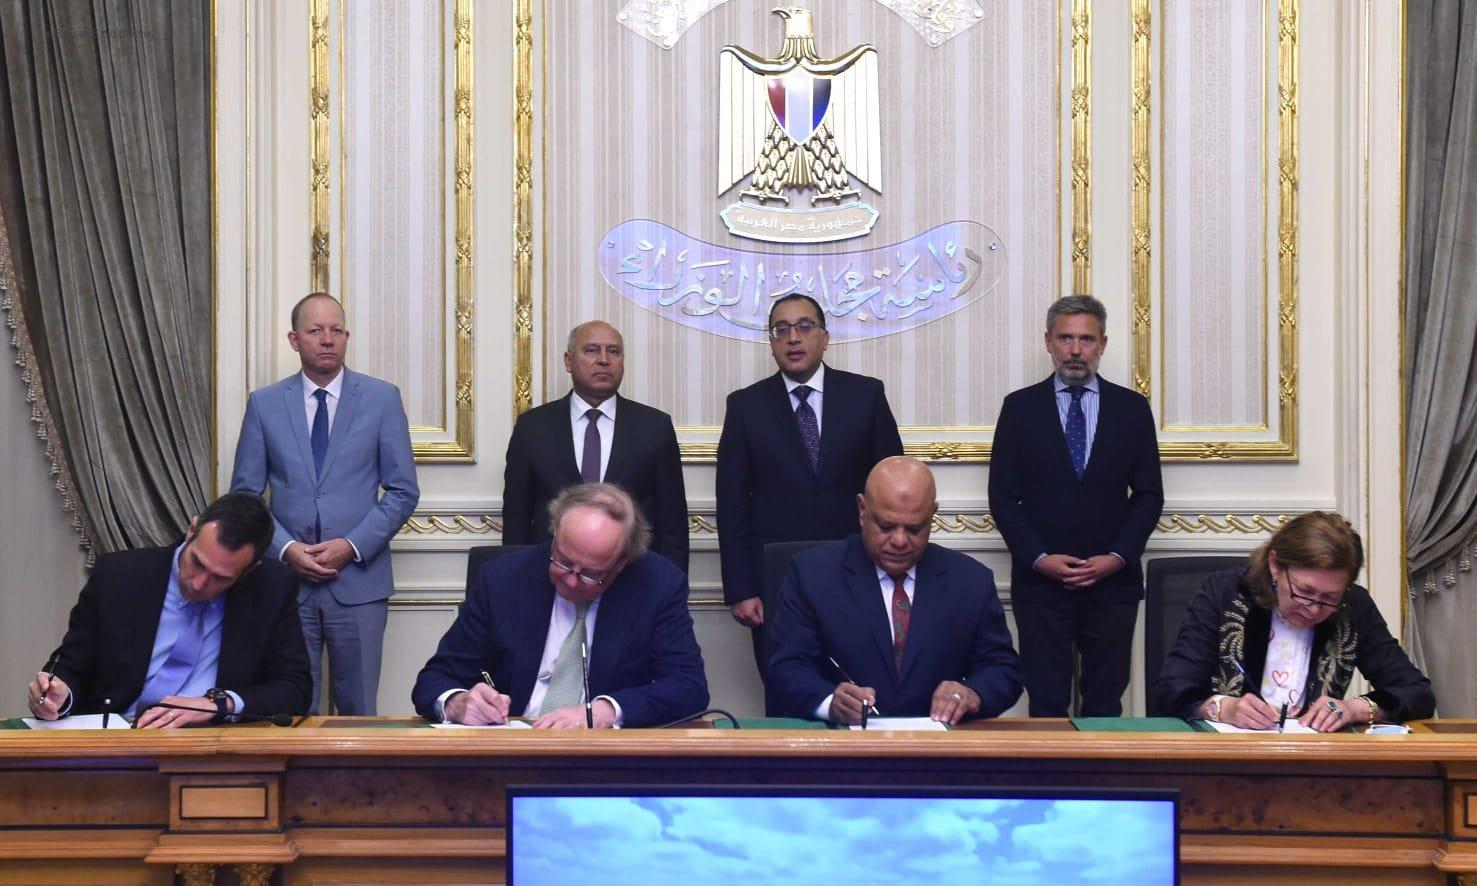 eBlue_economy_Contship Italia signed the concession for a new container terminal in Egypt with Hapag Lloyd